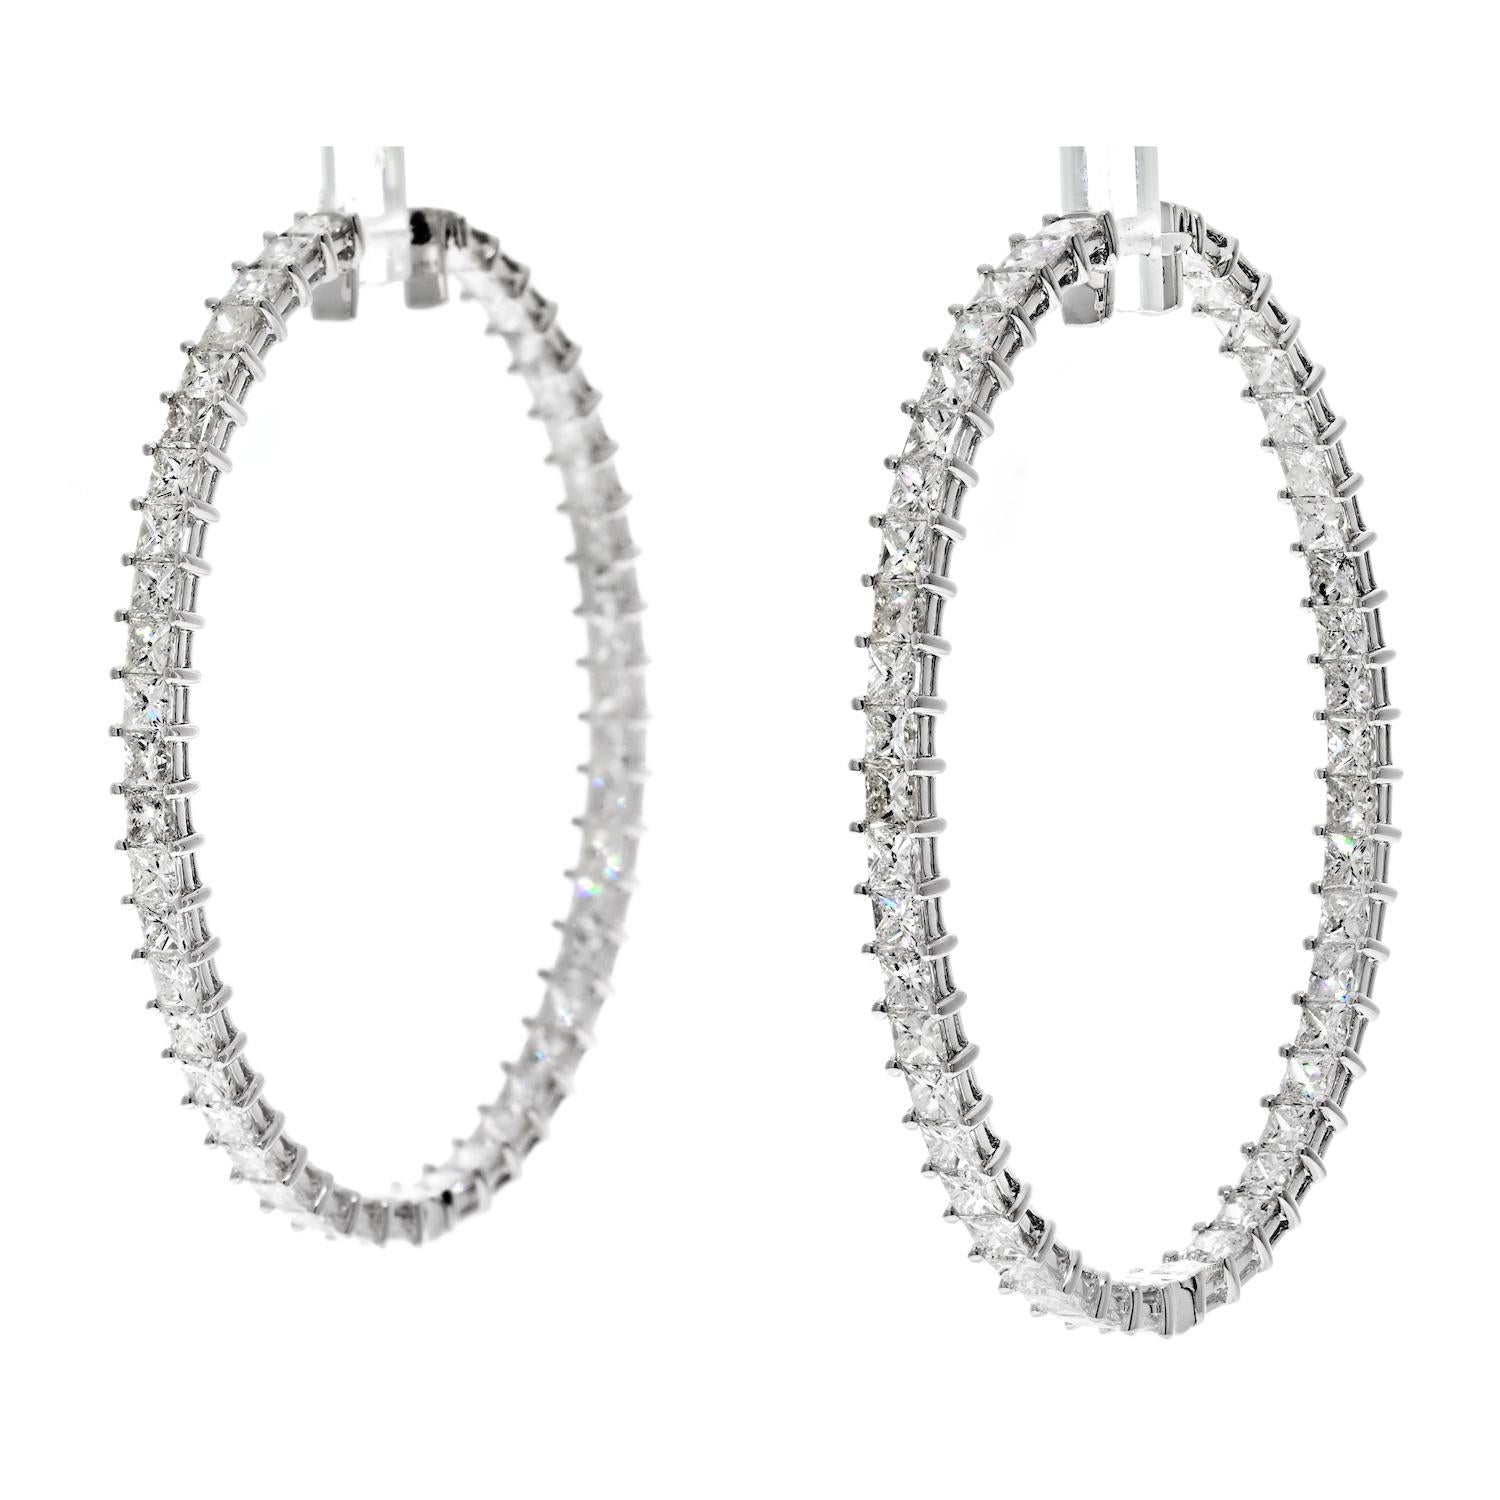 The 18K White Gold 9.62cttw Princess Cut Diamond Hoop Earrings are an exquisite piece of jewelry that exudes elegance and style. These round-shaped earrings feature a striking display of diamonds, mounted both inside and out, creating a stunning